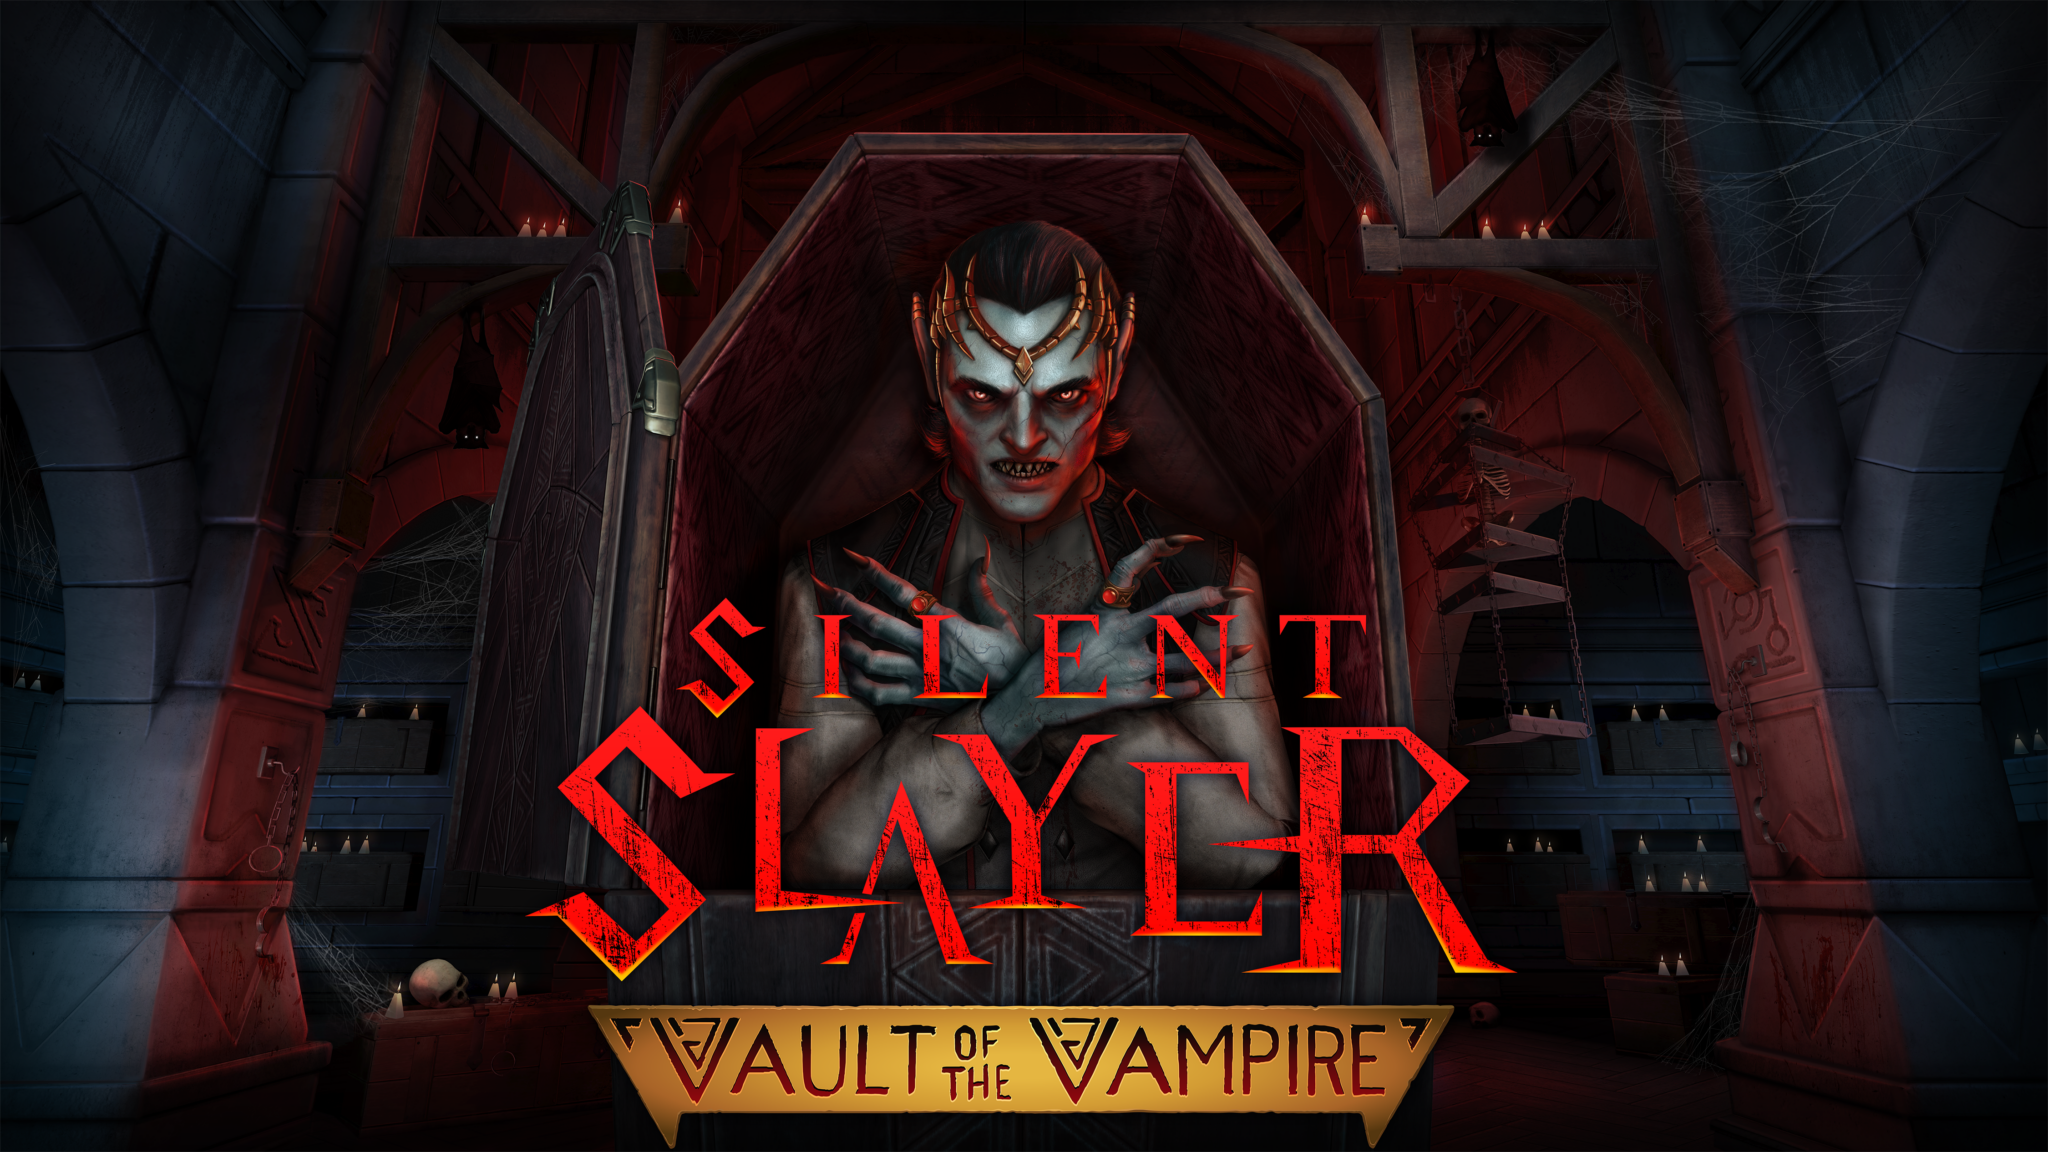 Upcoming VR Games - Silent Slayer: Vault of the Vampire